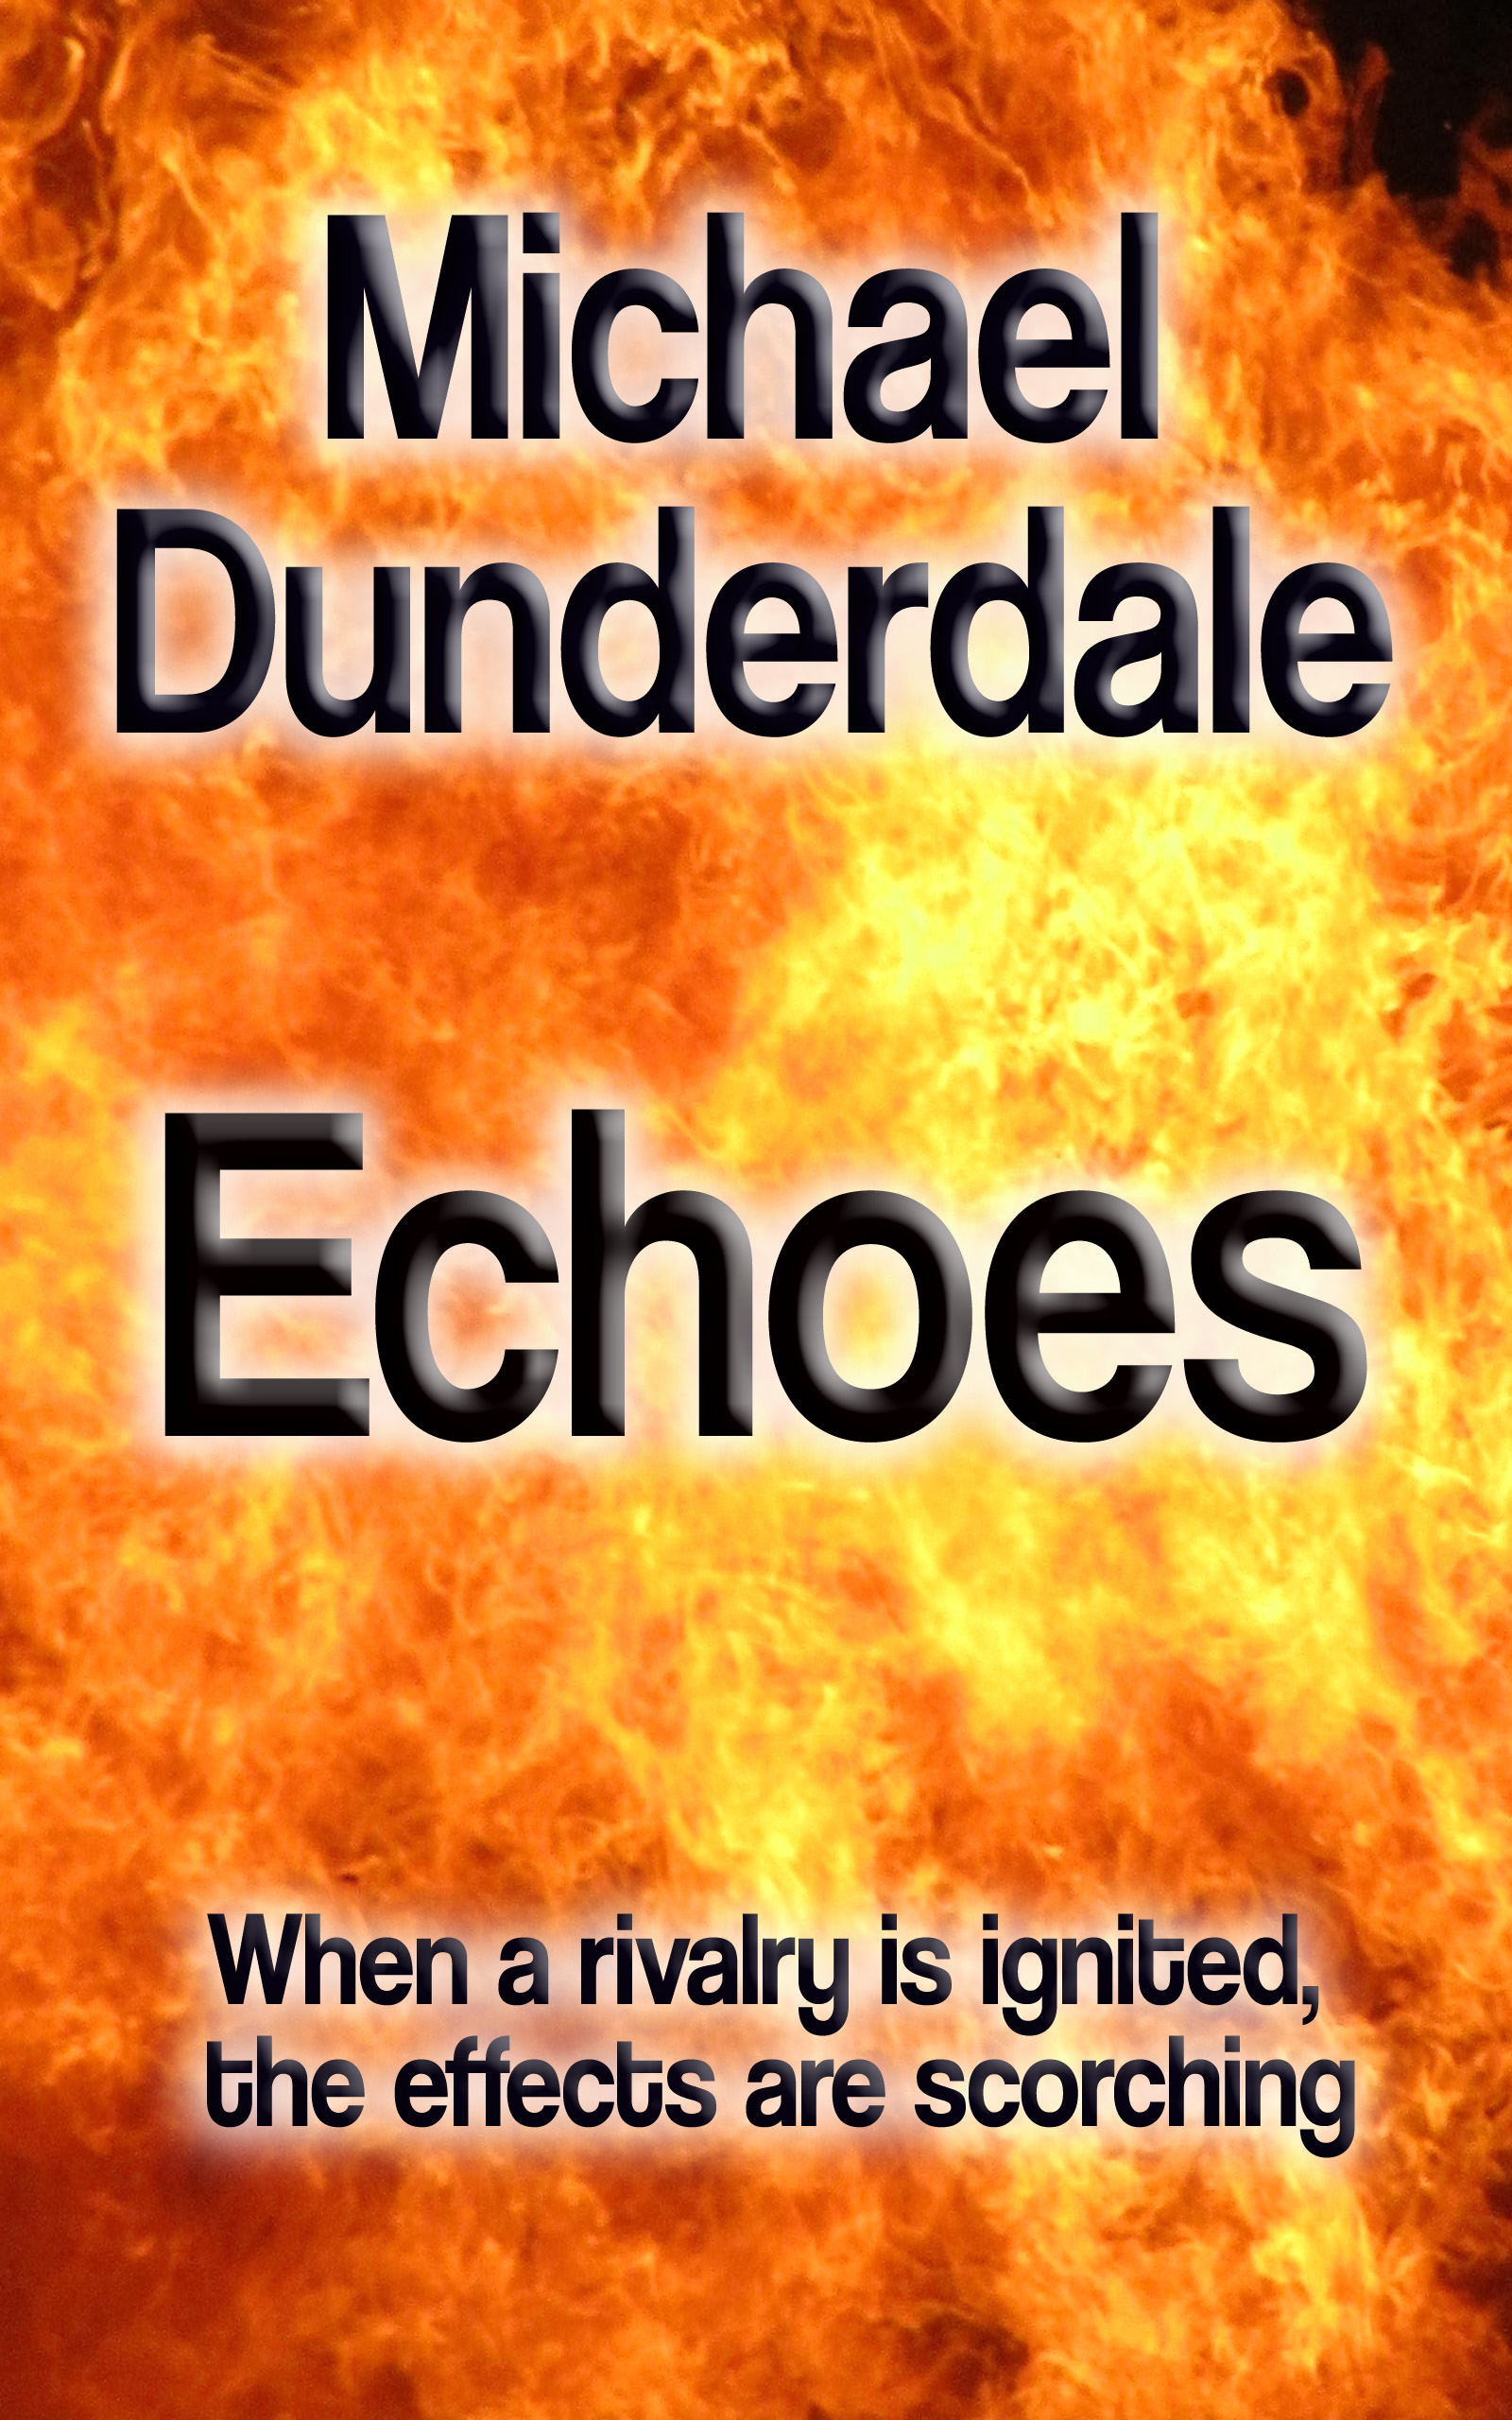 FREE: Echoes by Michael Dunderdale